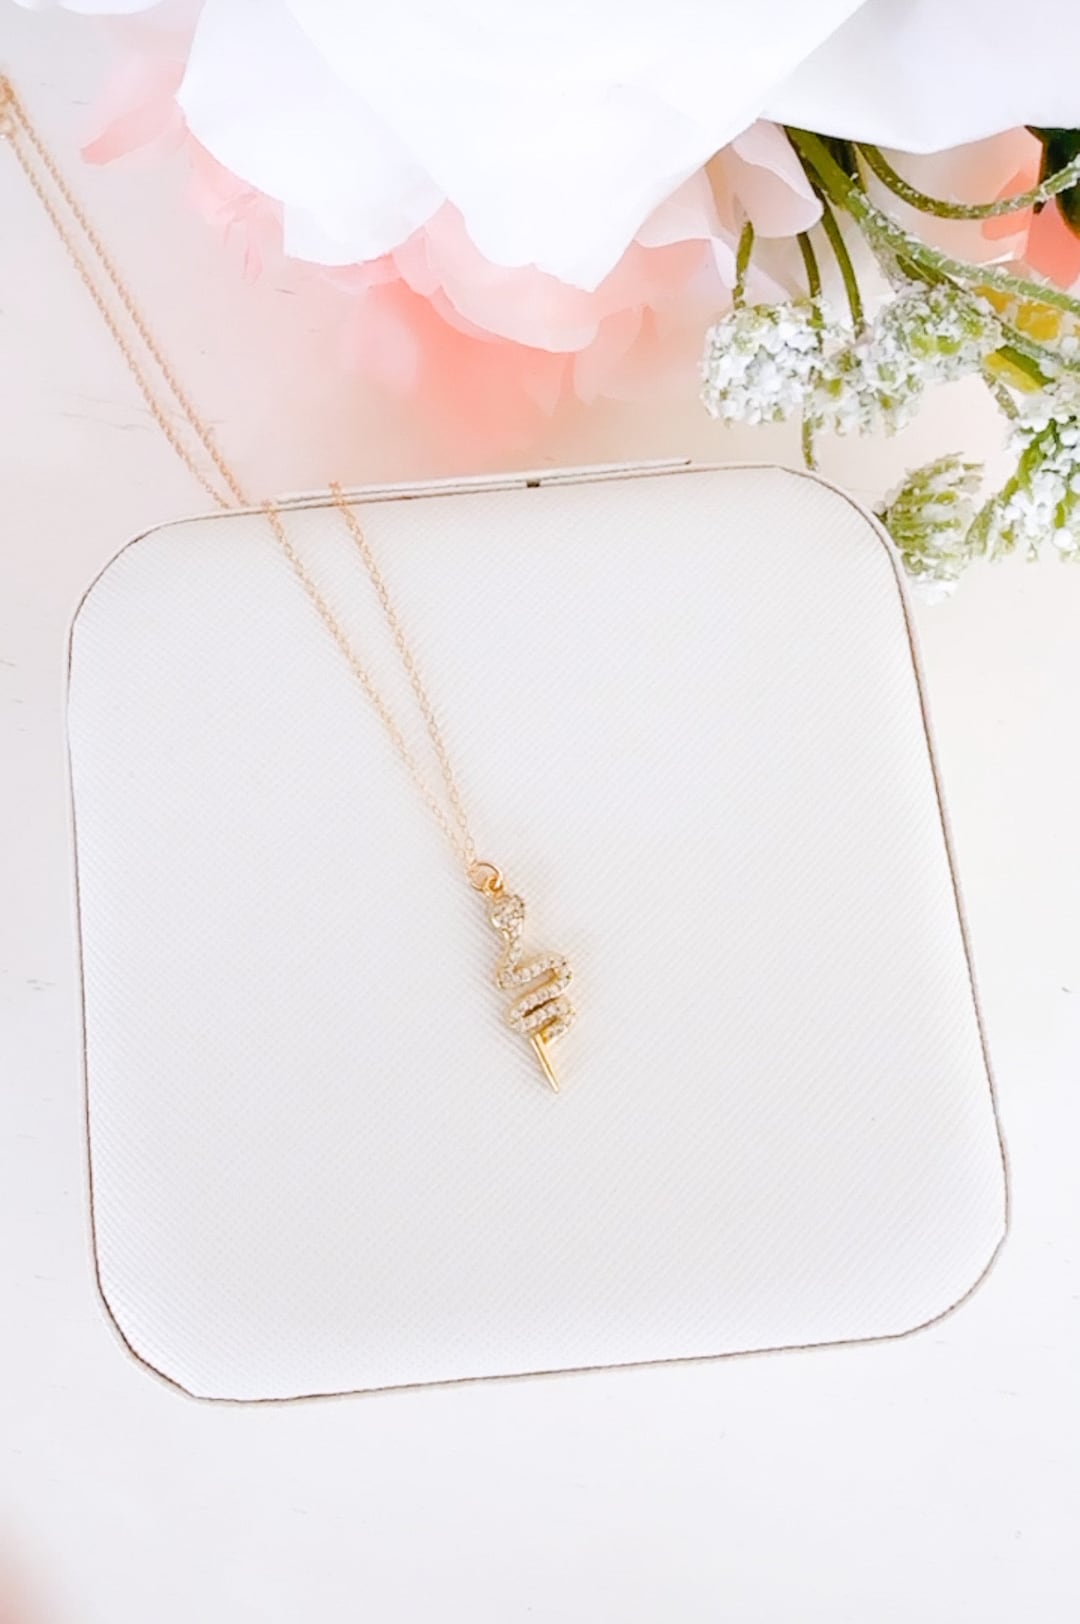 Buy All Too Well Taylor Swift Merch Gift Necklace Jewelry Pendant Online in  India - Etsy